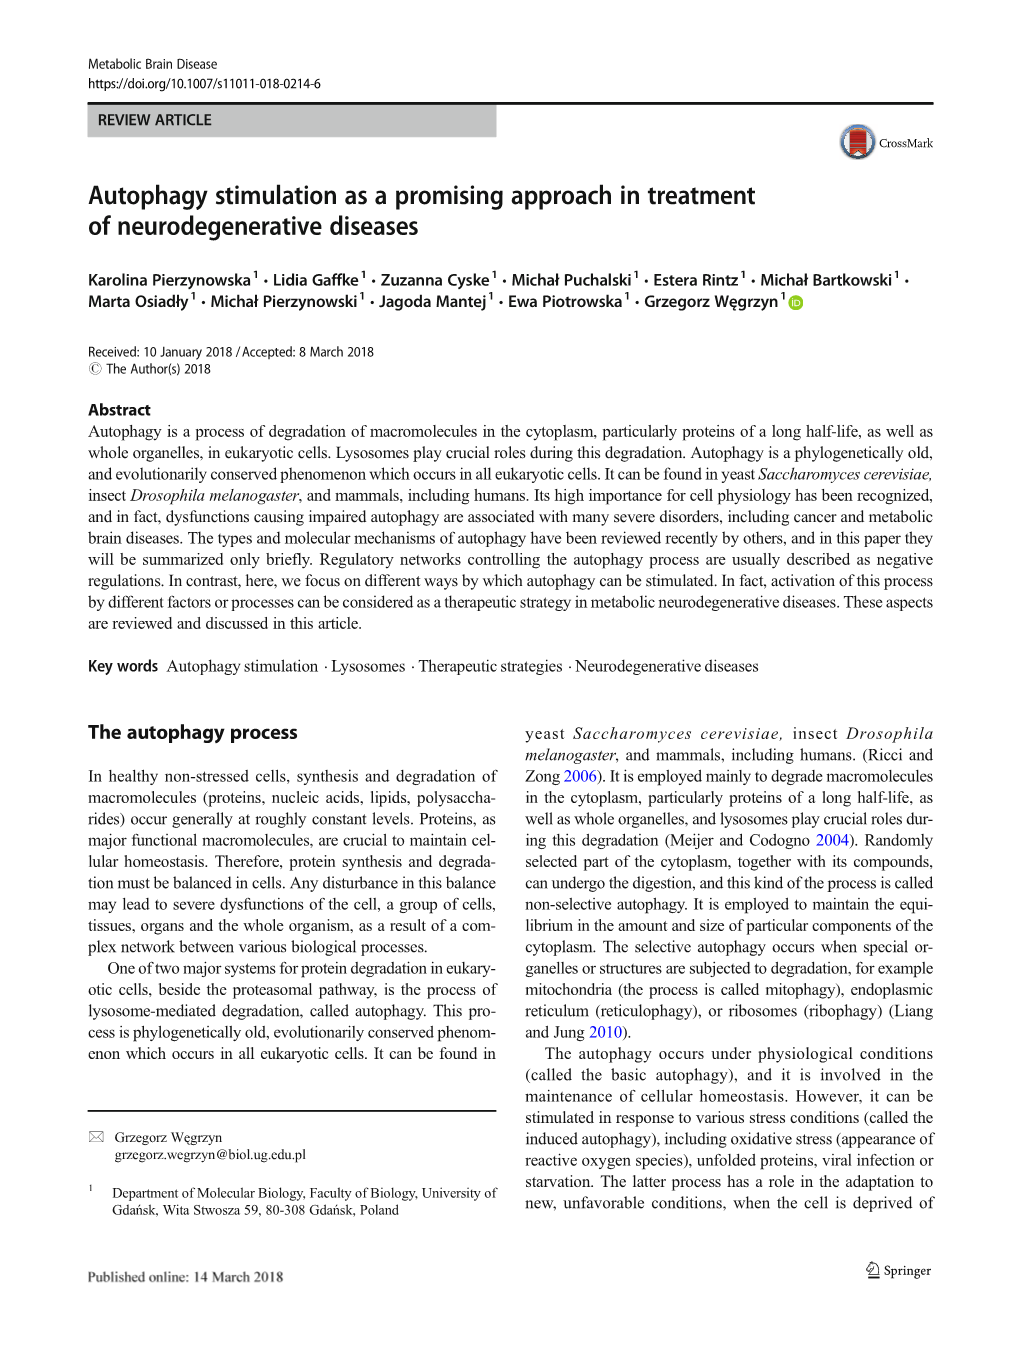 Autophagy Stimulation As a Promising Approach in Treatment of Neurodegenerative Diseases